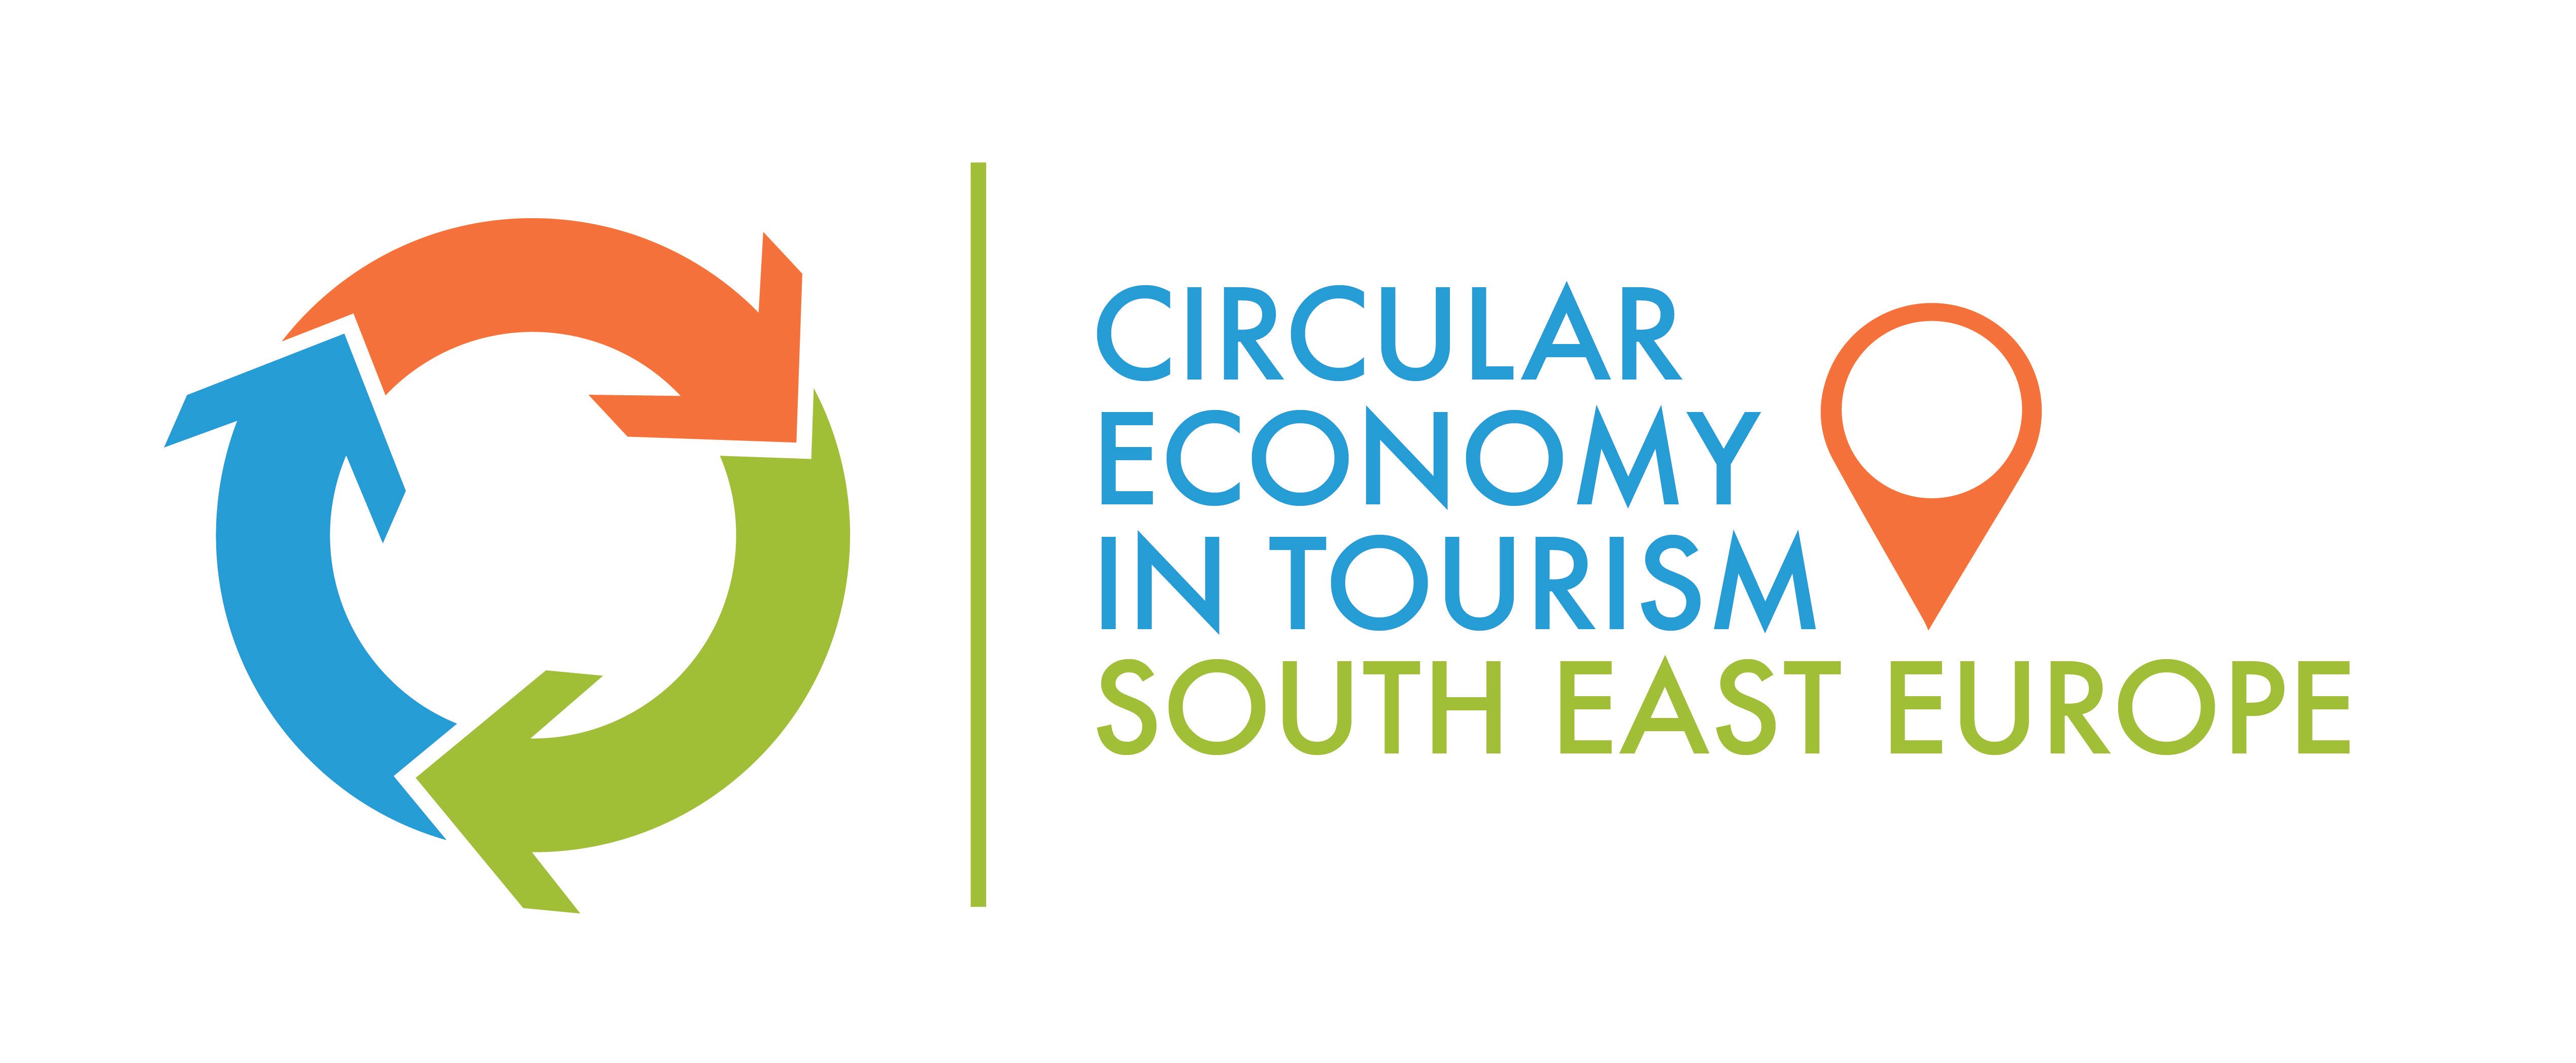 Unido Logo - Conference on Circular Economy in Tourism in South East Europe